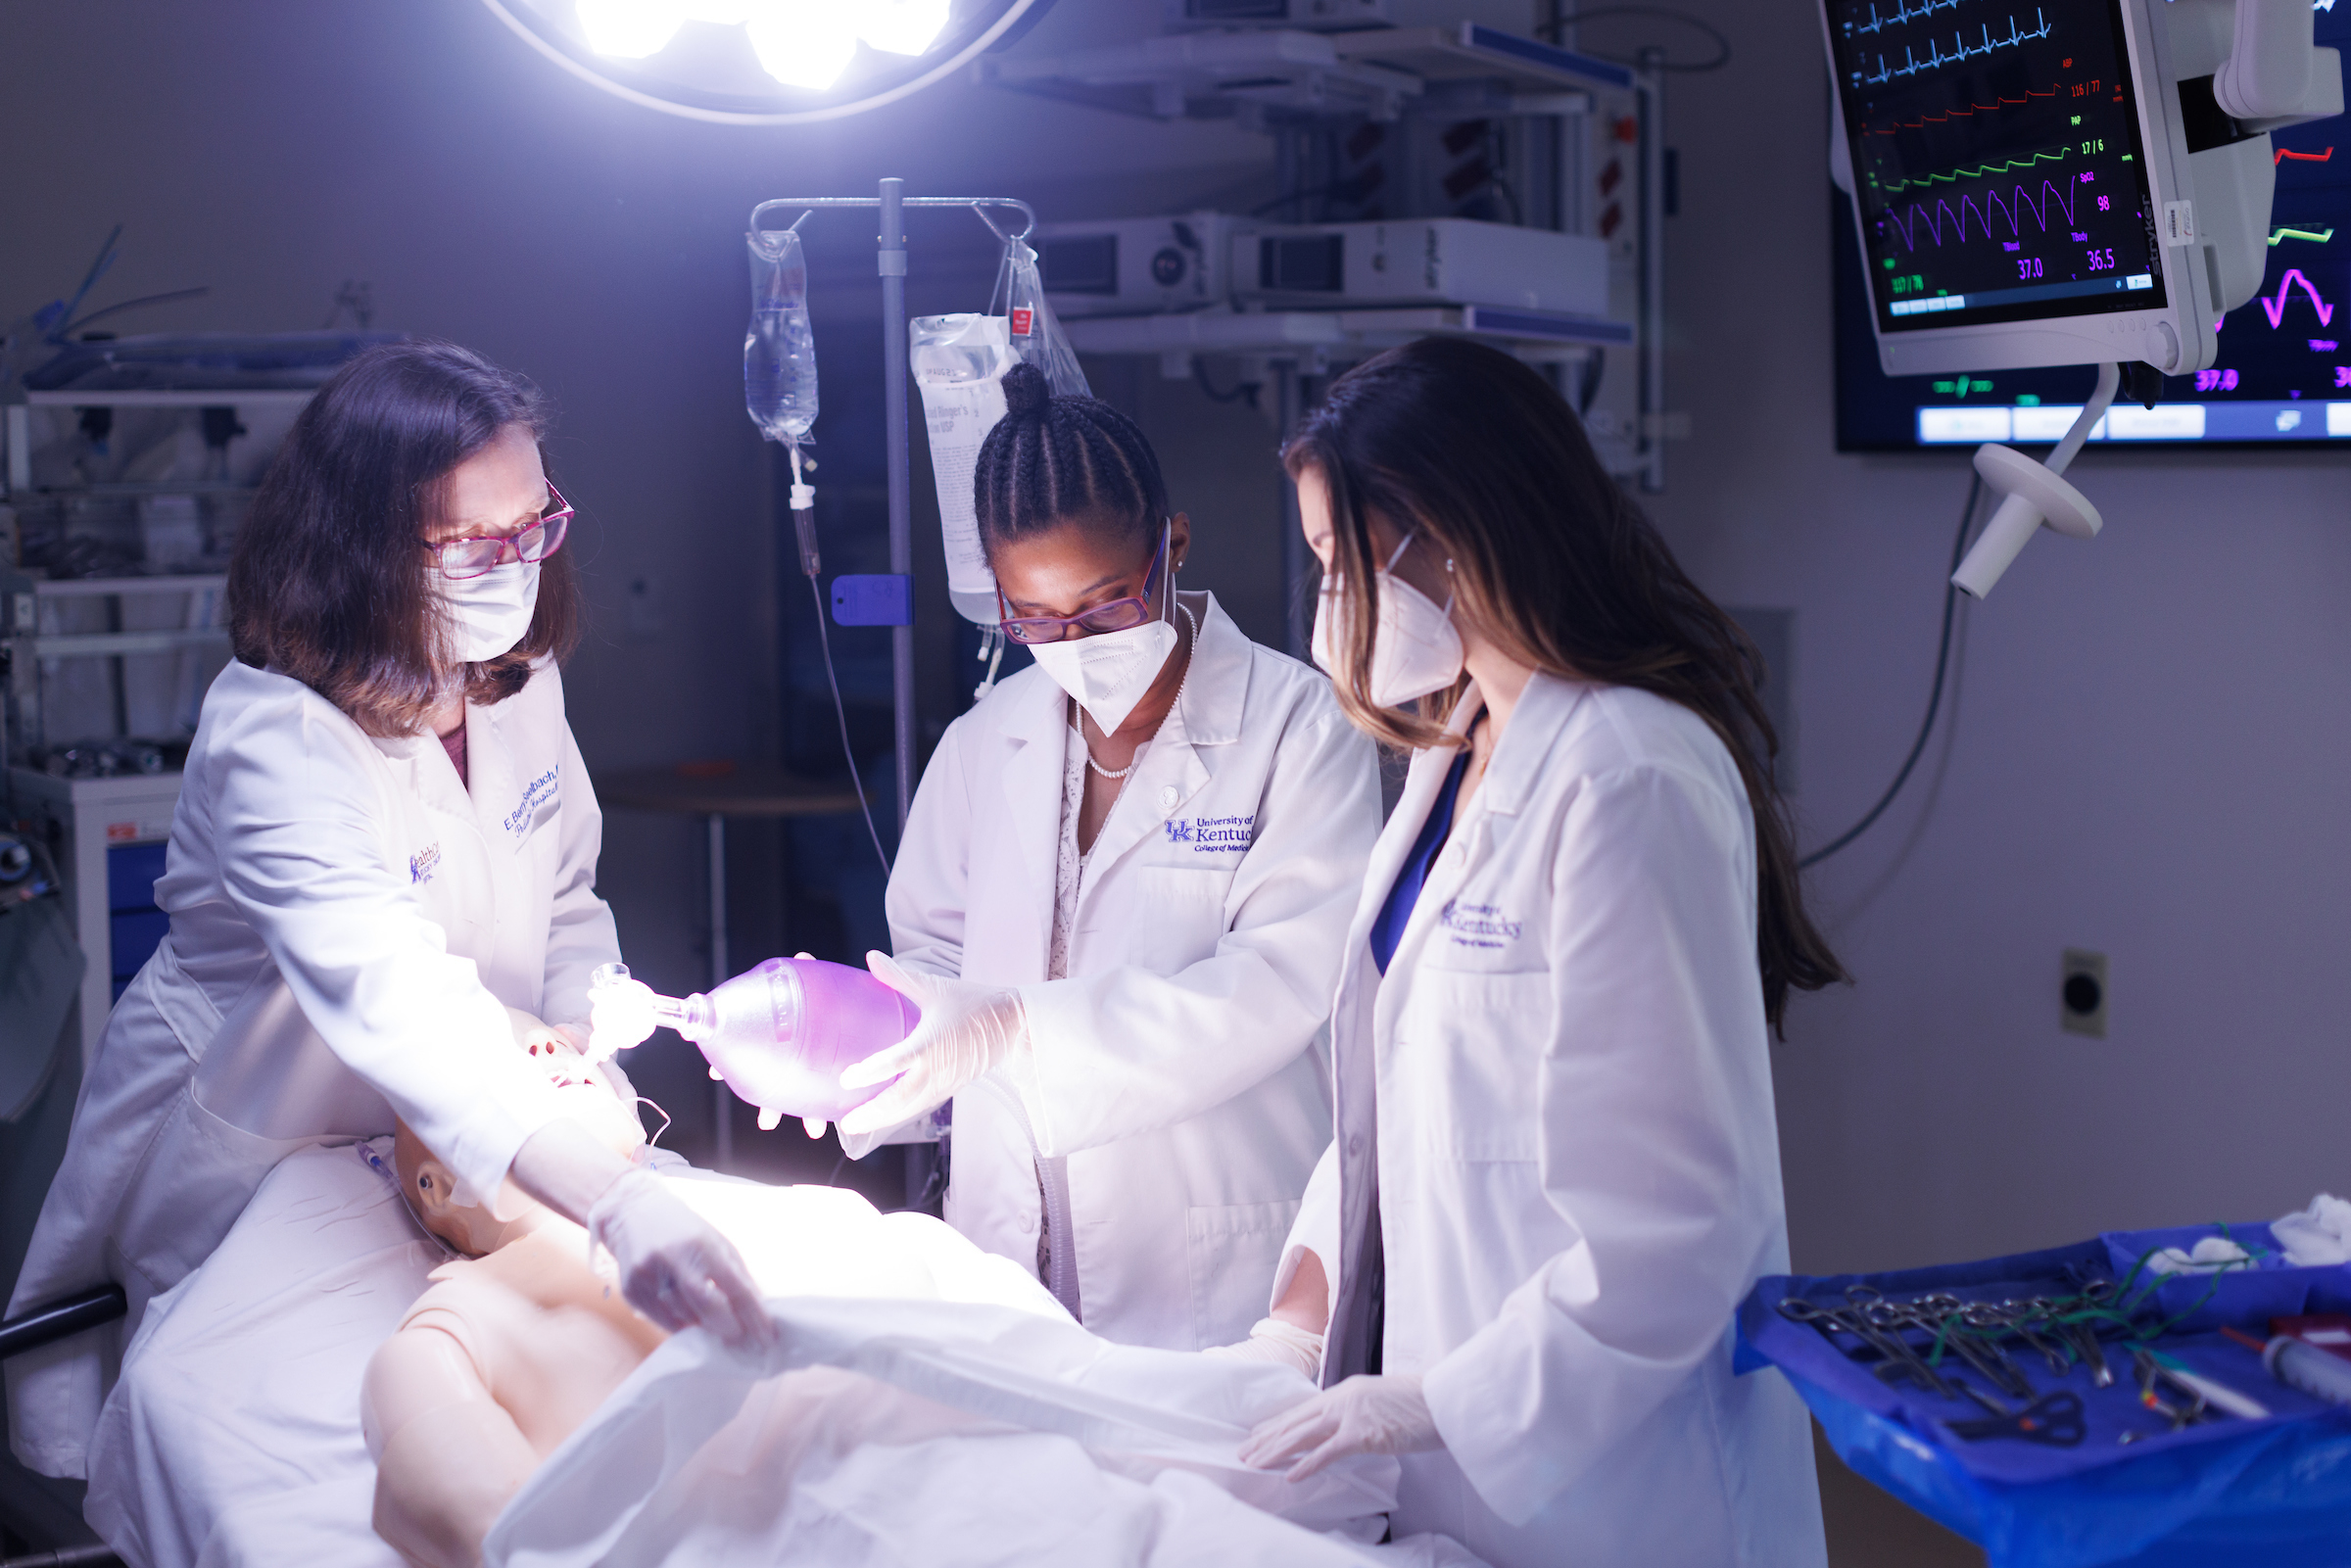 A professor and students work in a simulation surgery.